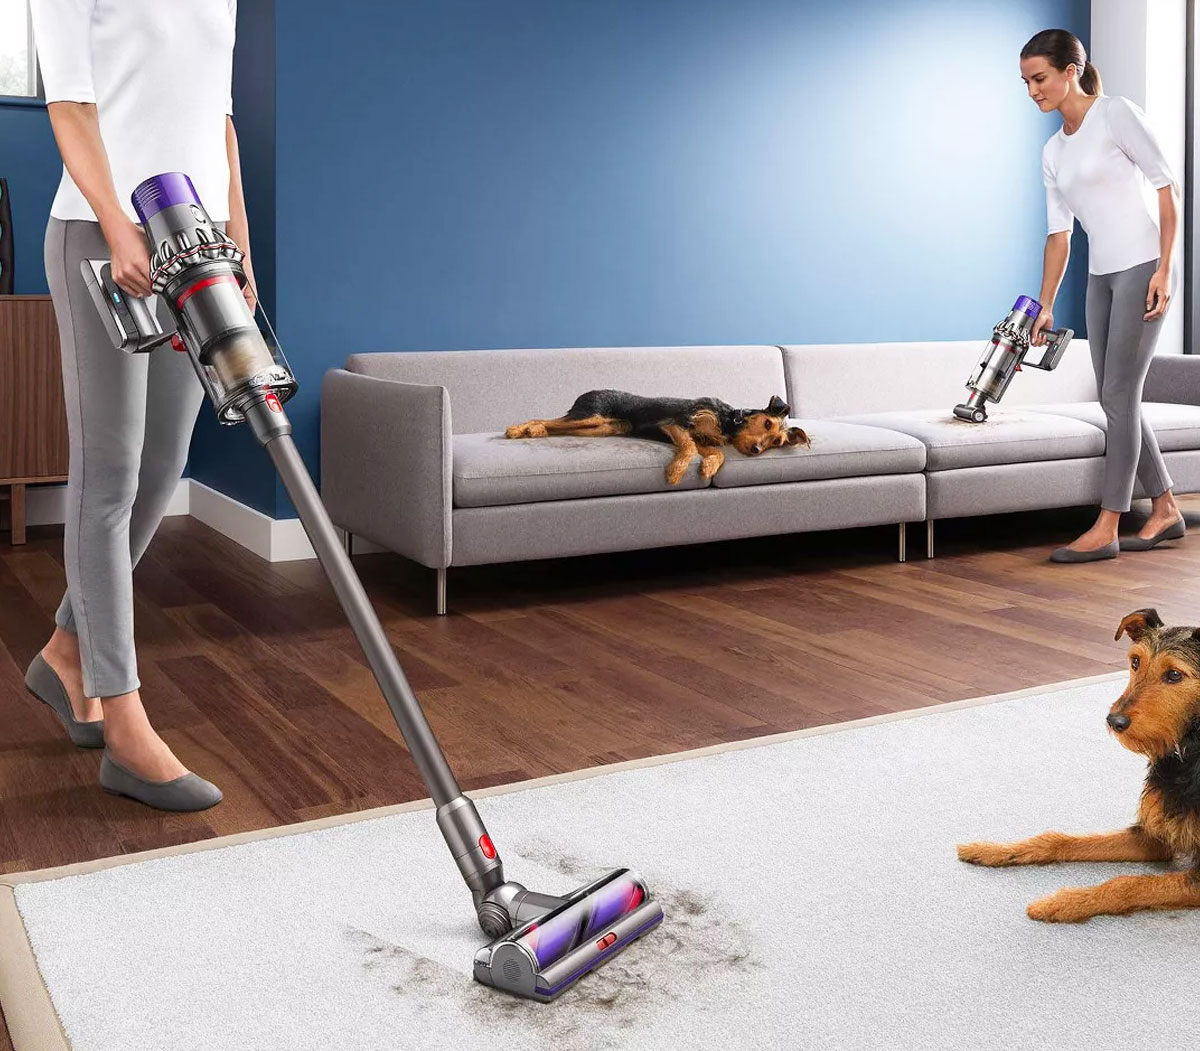 woman using a dyson cordless vacuum to clean up pet hair on floor and on couch in background